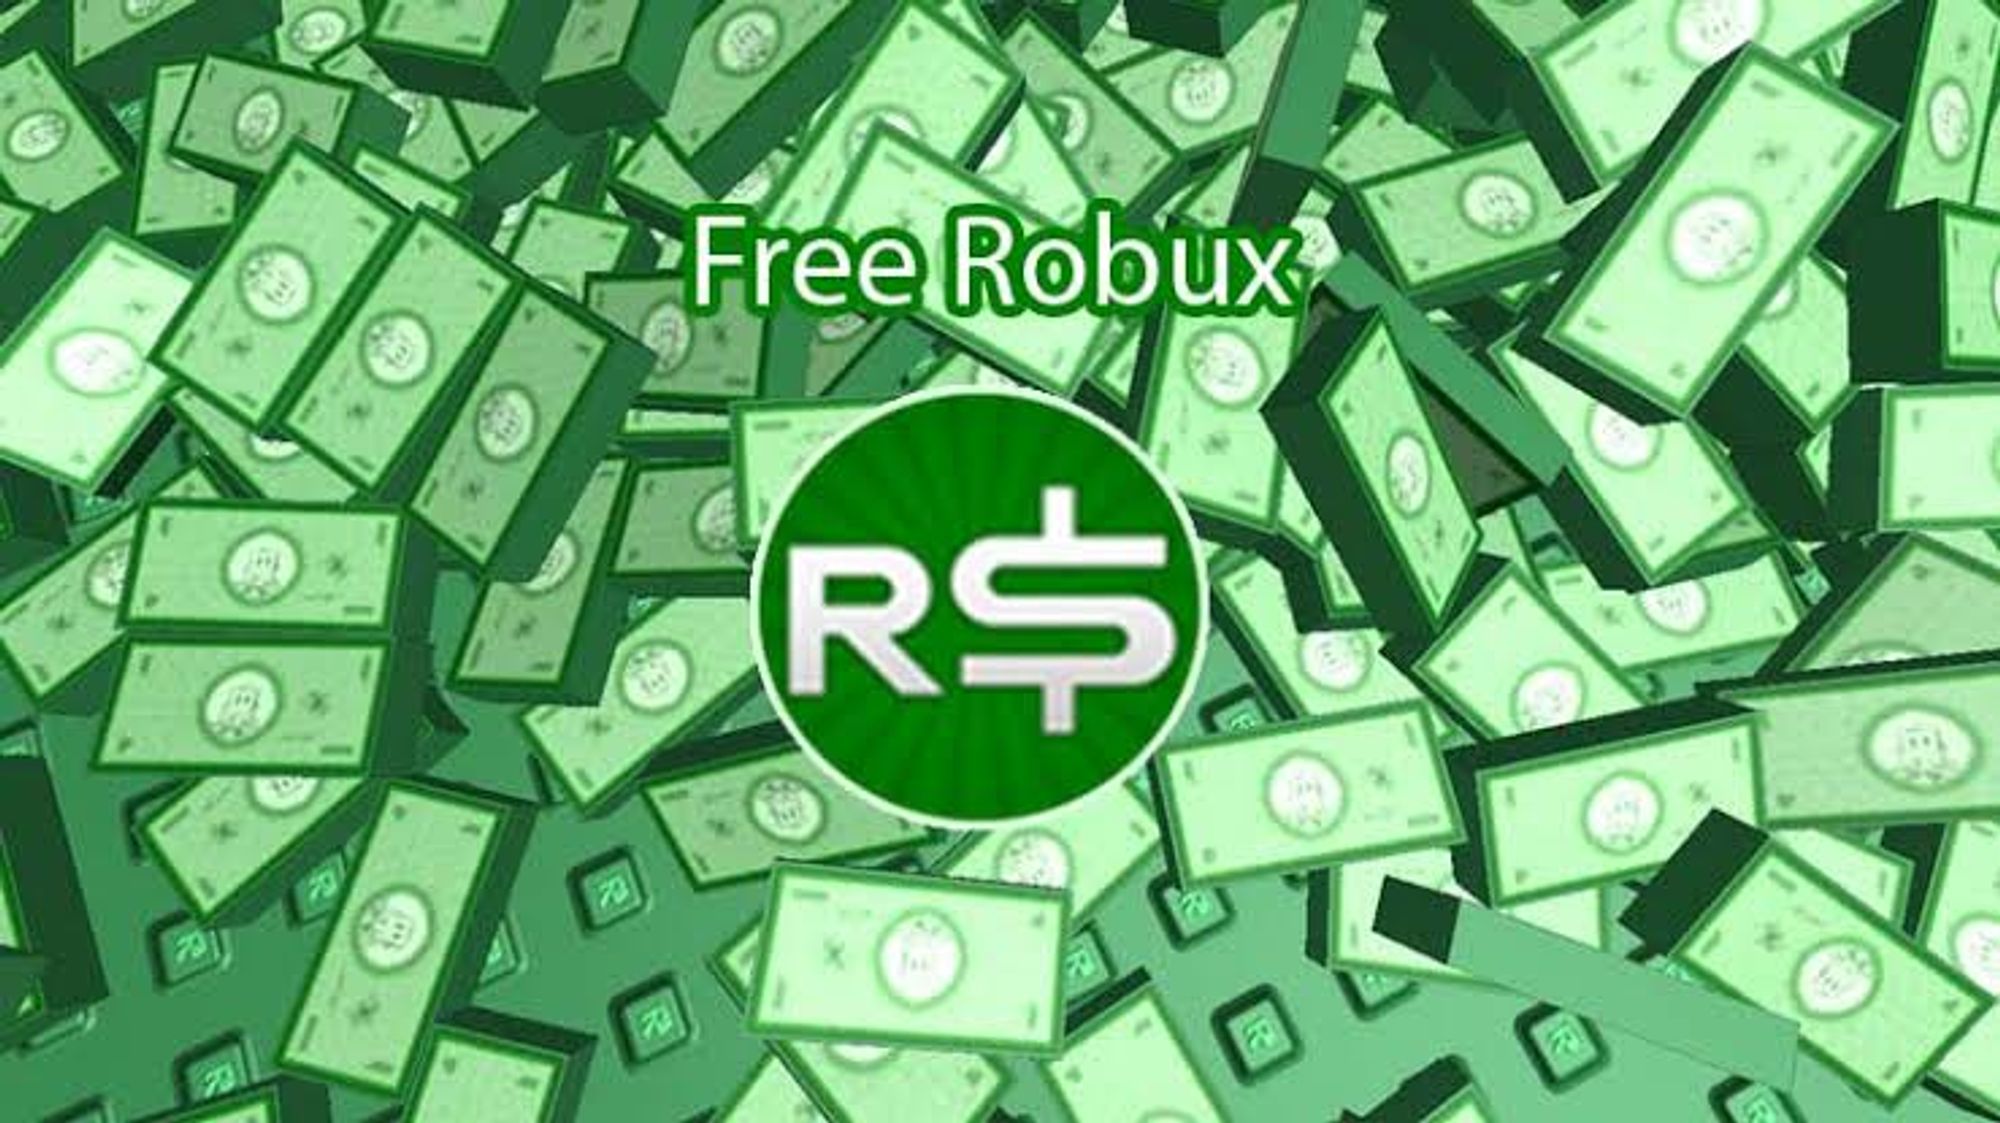 Intant Free Robux Newest Roblox Free Robux Generator 100k Daily Free Robux Giveaways - how to get free robux on your ipod